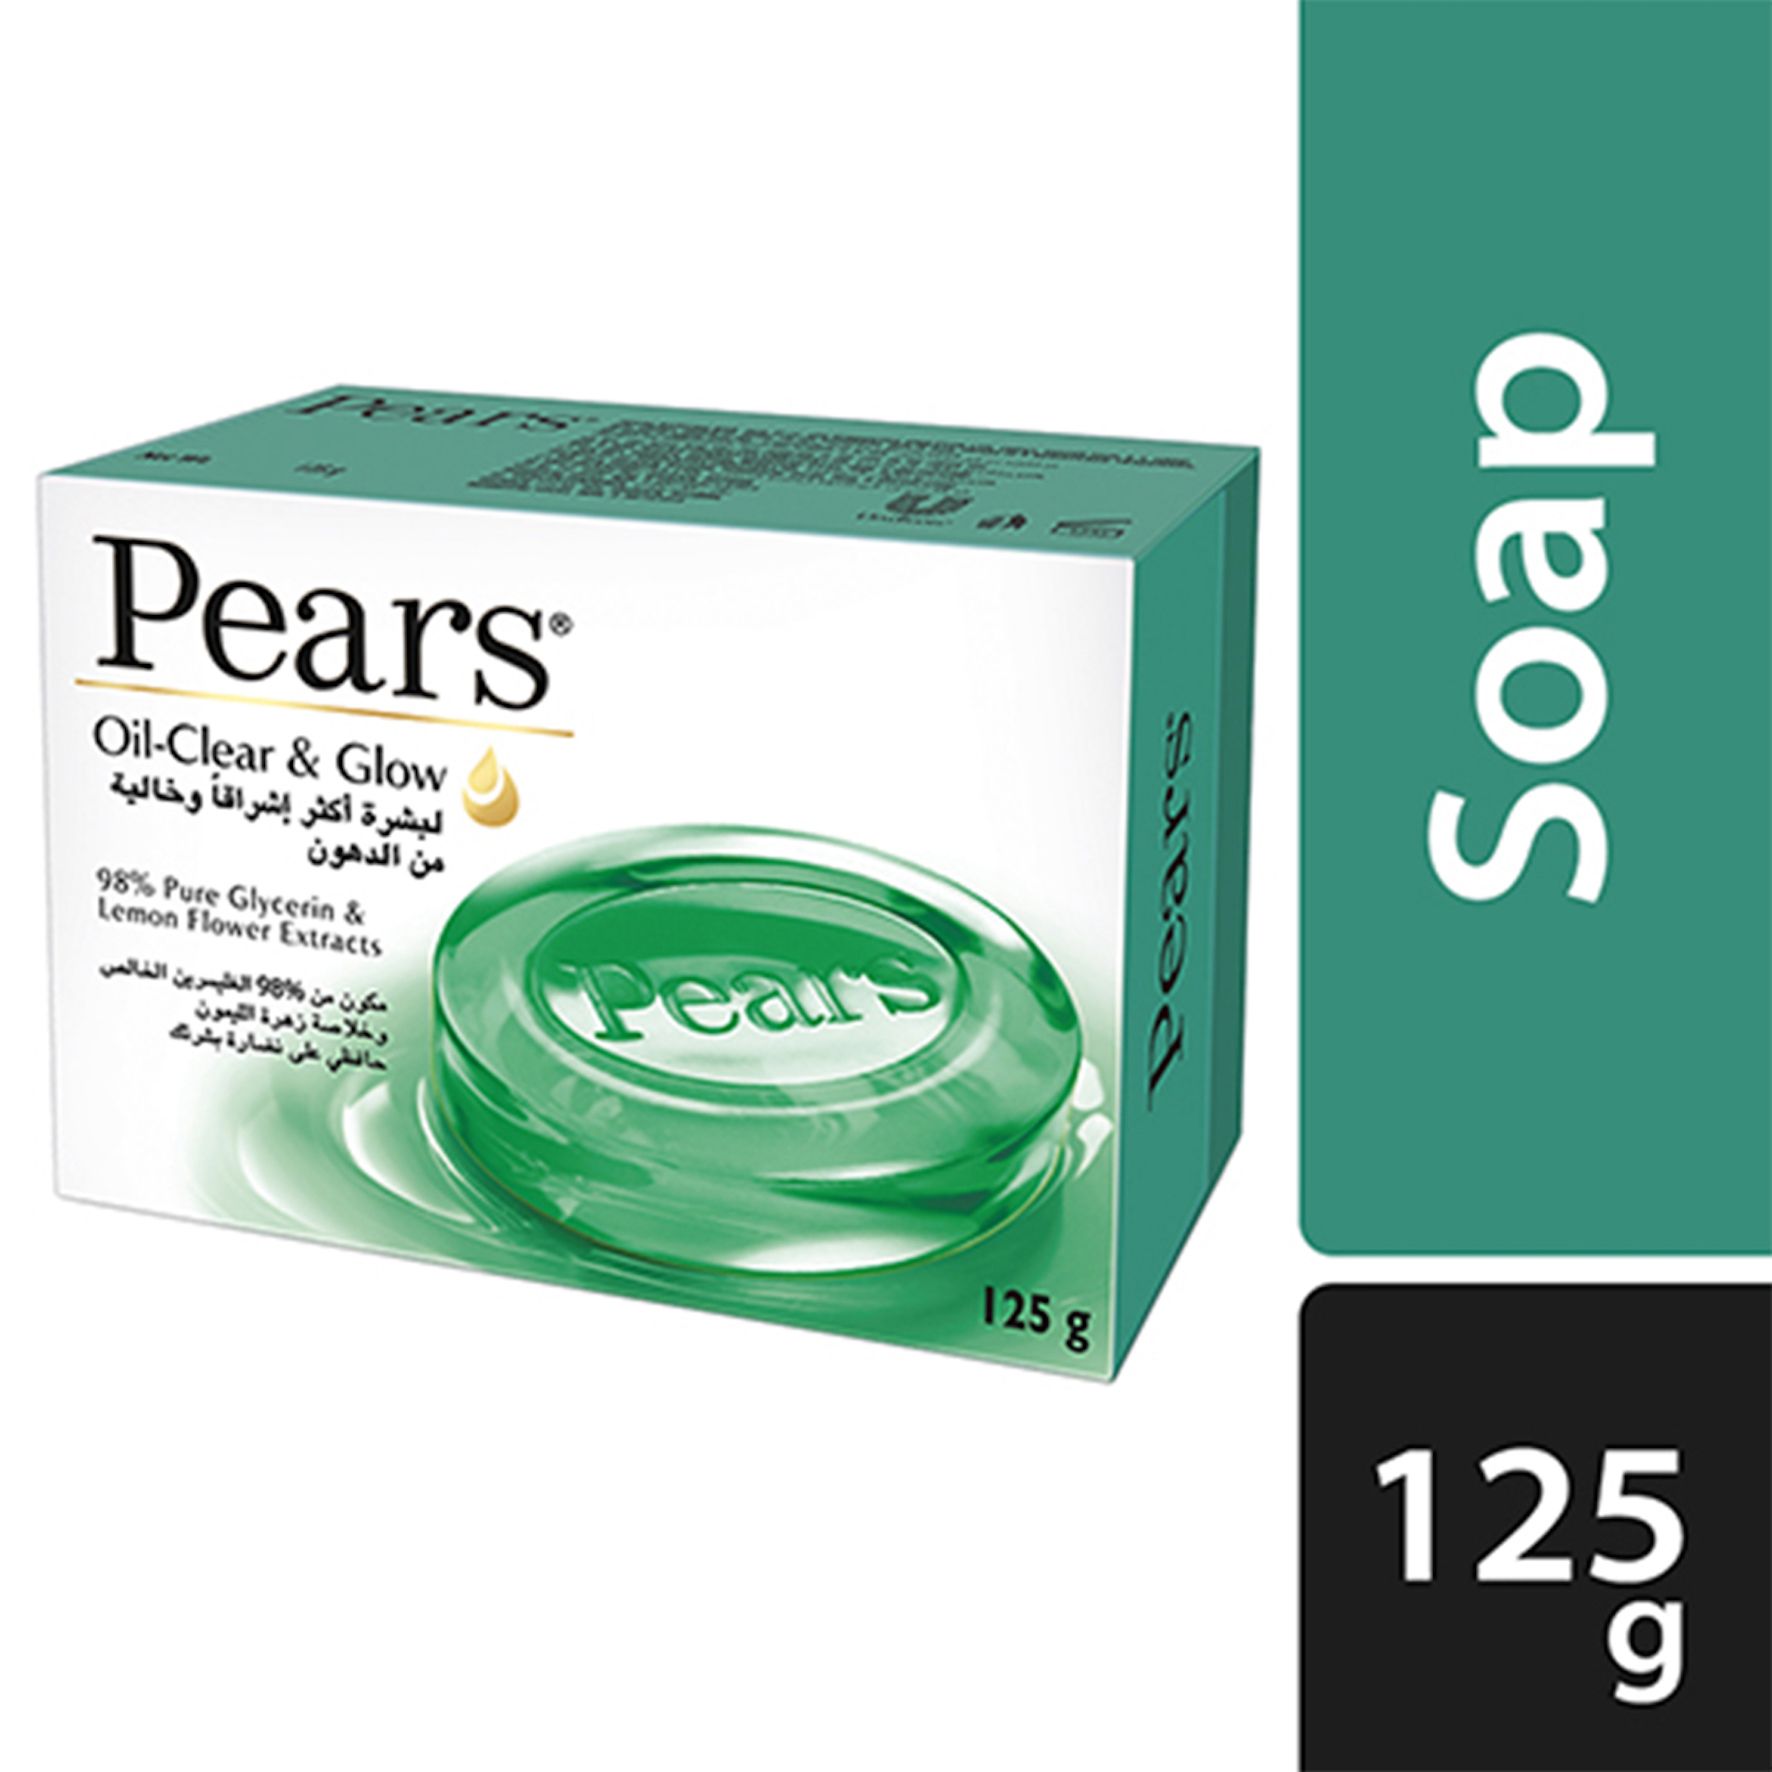 Pears Soft And Fresh Soap, 125 g, Carton of 45 Pcs